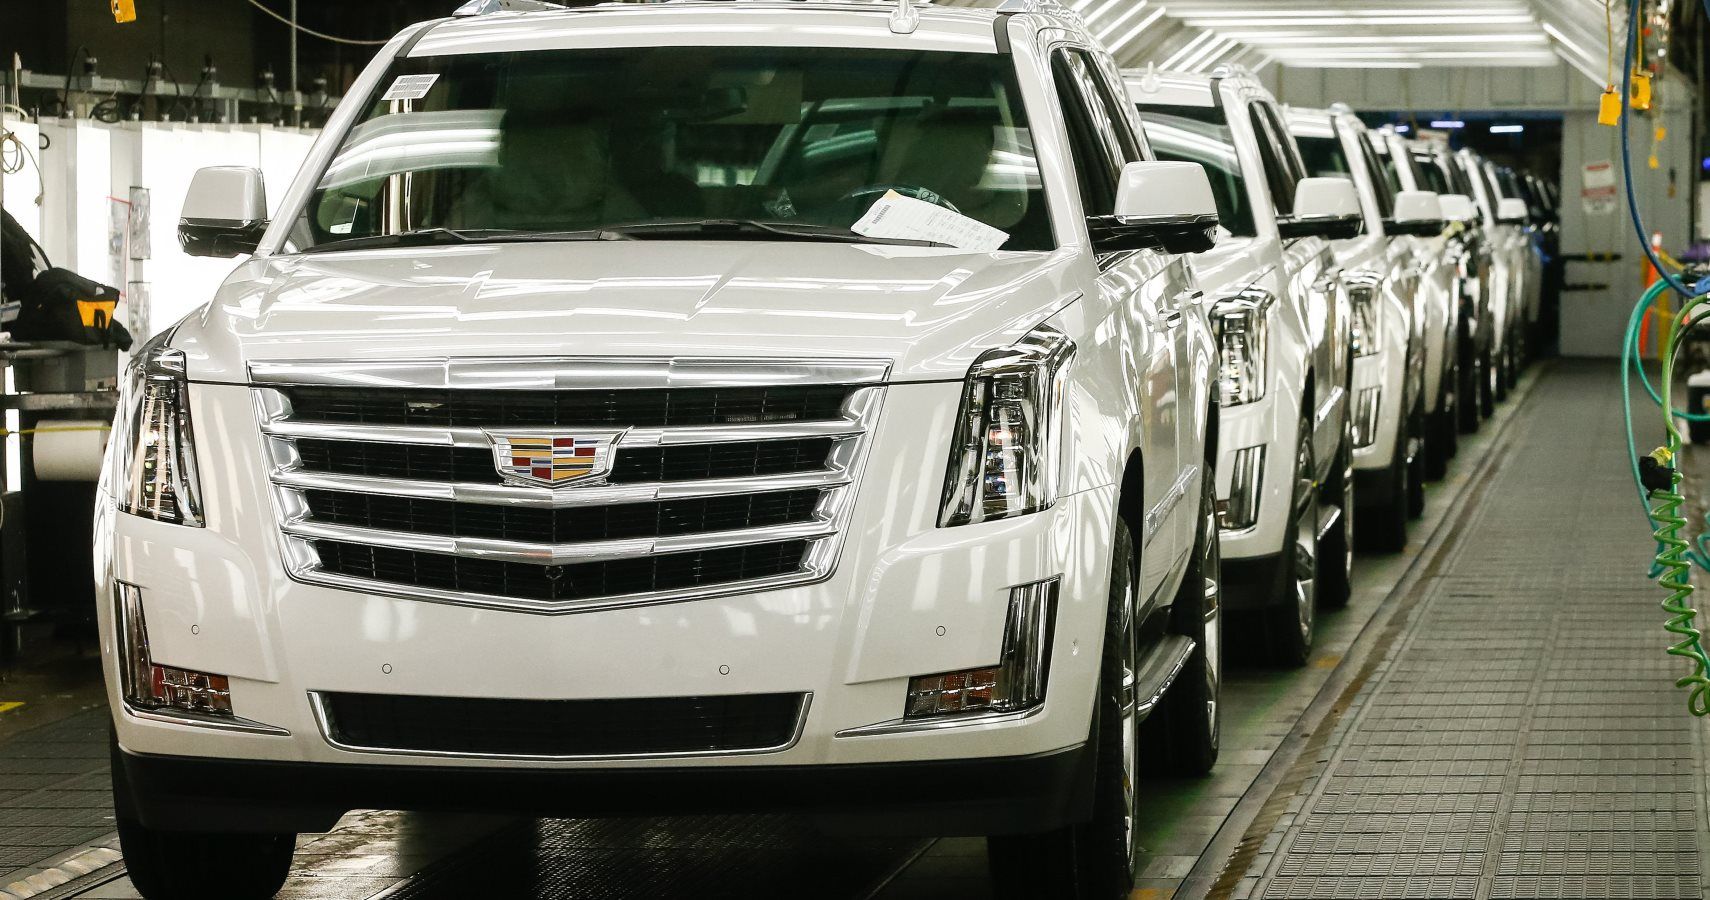 Cadillac Escalade vehicles roll off the assembly line Tuesday, June 25, 2019 as General Motors announces it is investing an additional $20 million at Arlington Assembly to upgrade plant conveyors in preparation for the launch of GM’s all-new full-size SUVs. (Photo by Mike Stone for General Motors)